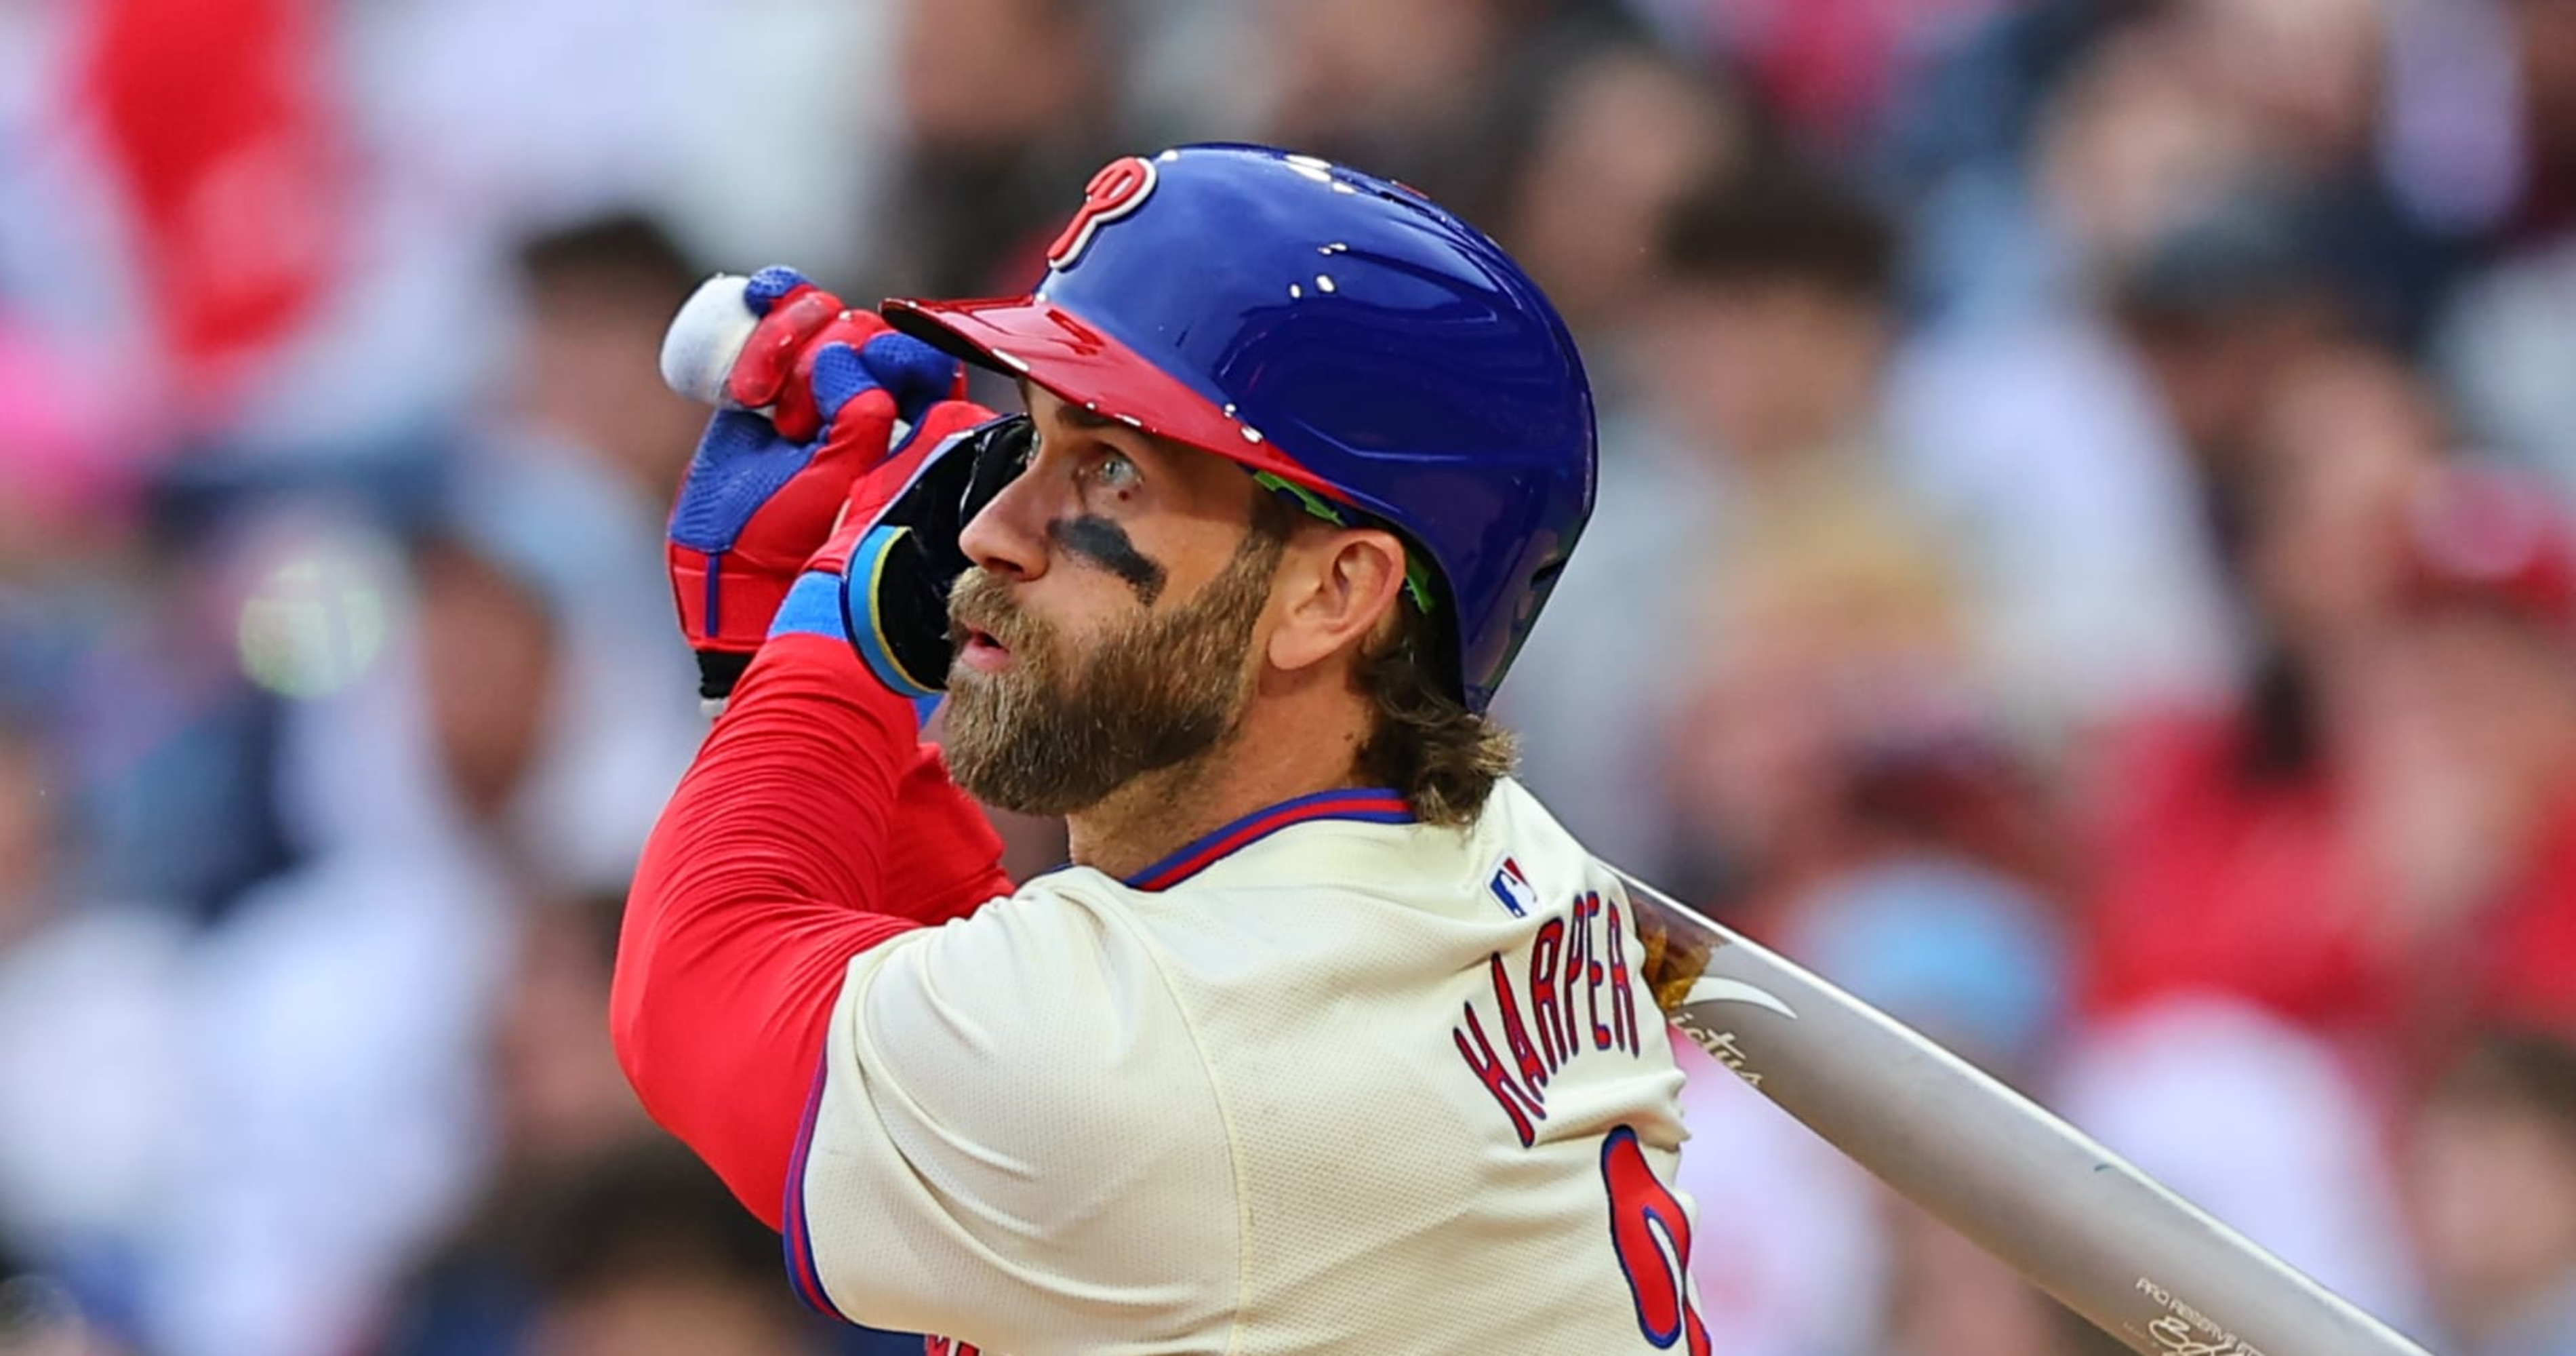 Phillies' Bryce Harper Wows MLB Fans with 3 HRs vs. Reds for First Hits of Season